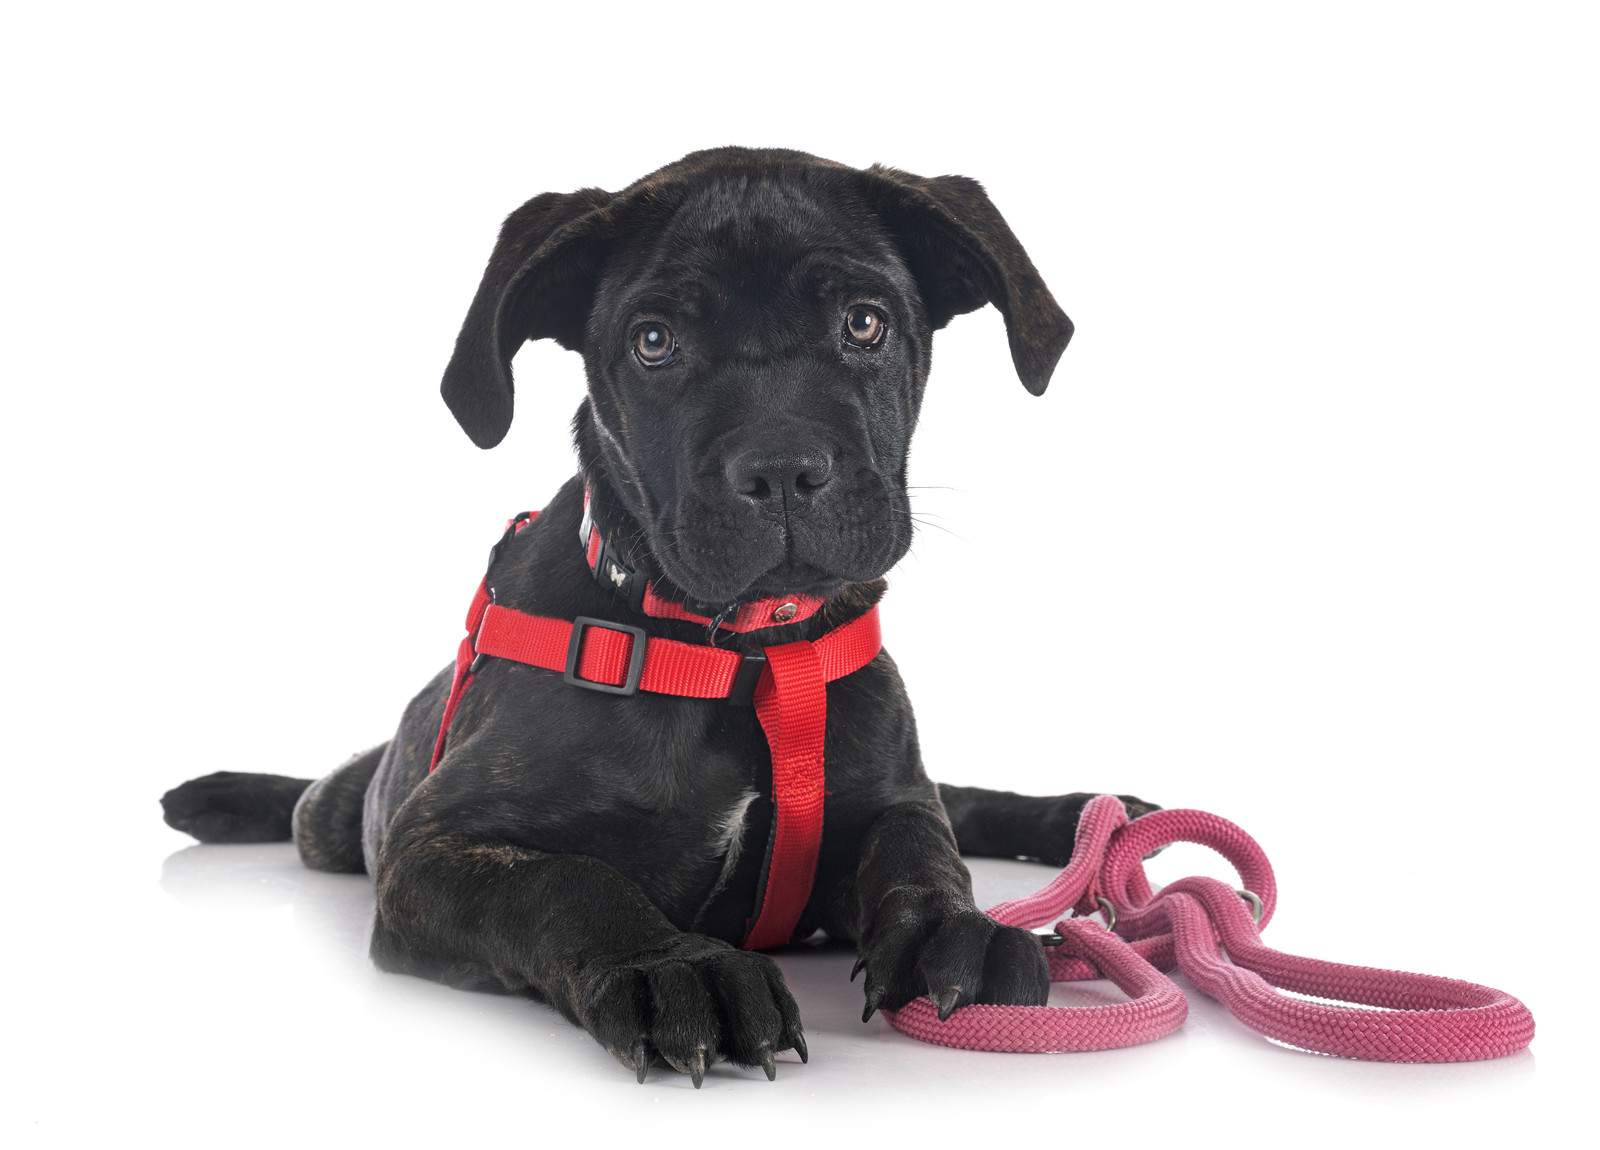 Black puppy lying down wearing red harness